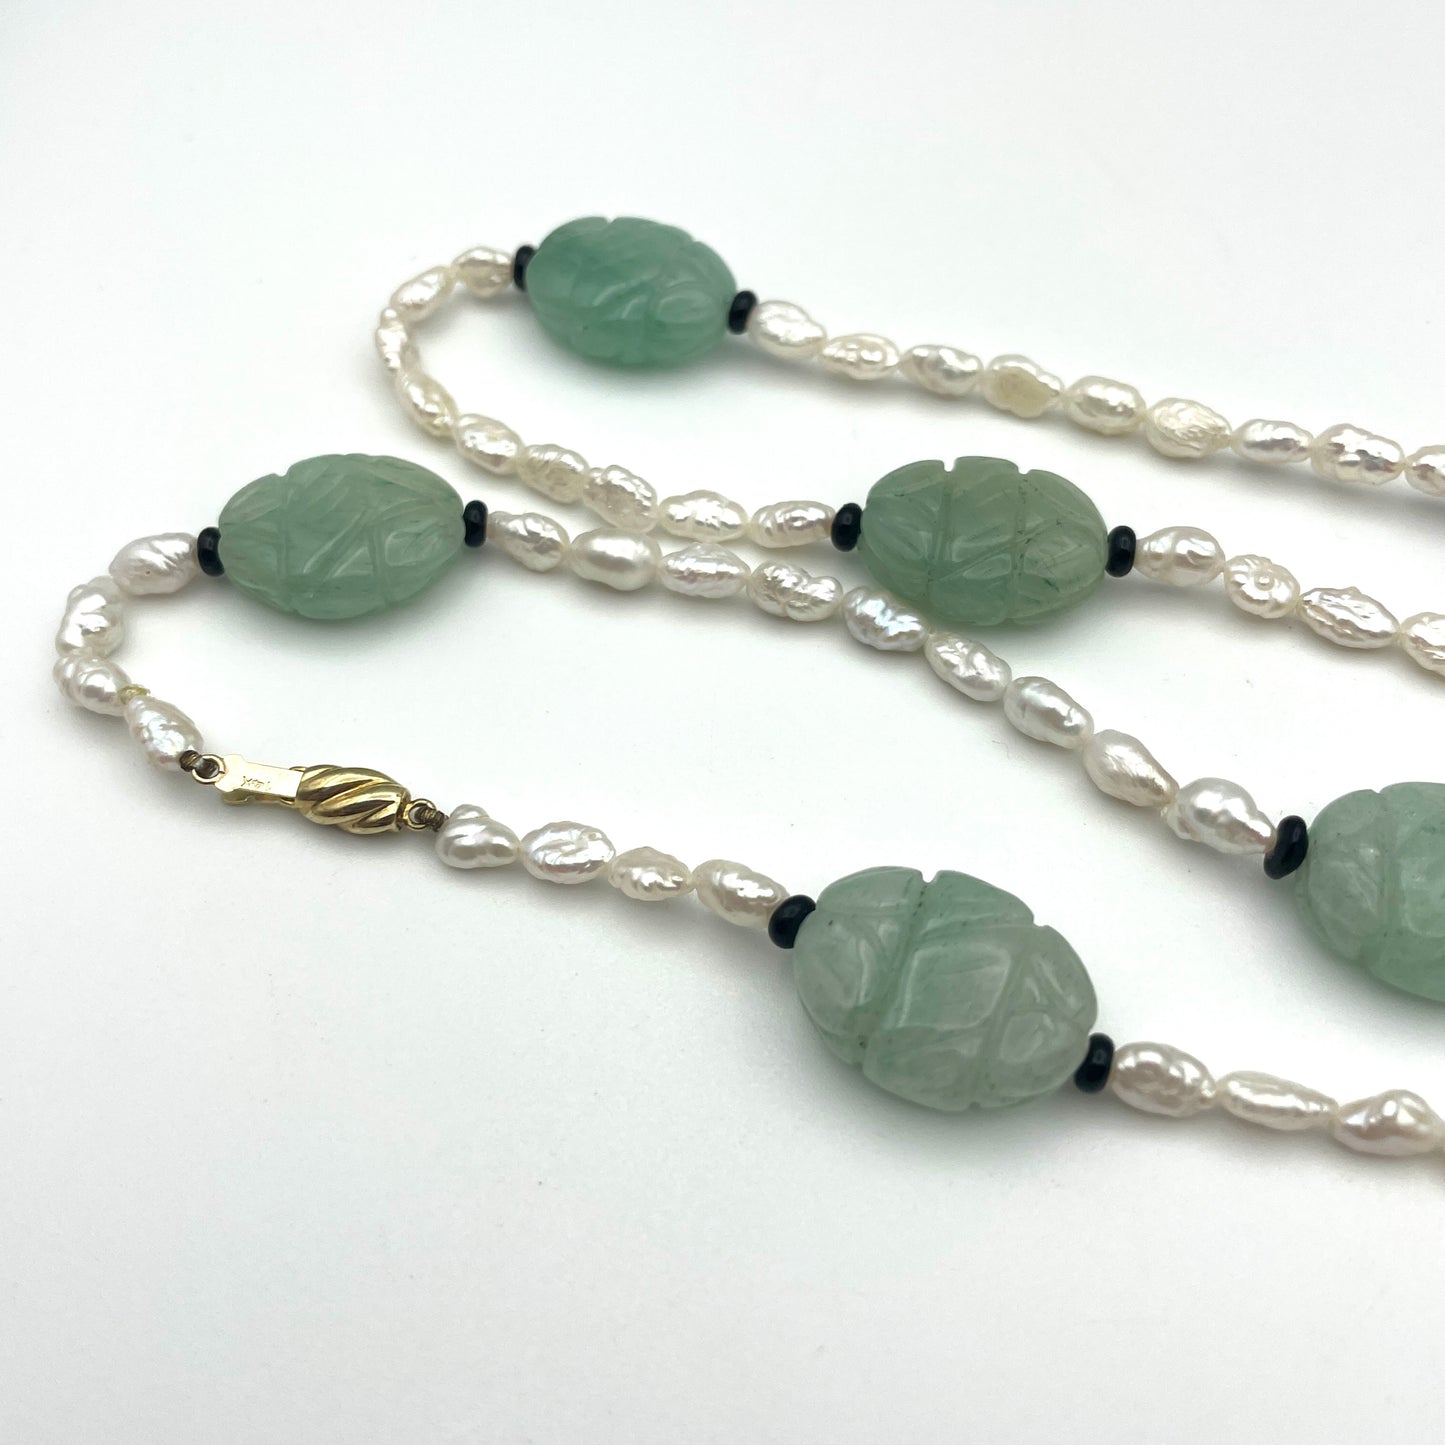 Vintage Jade & Seed Pearl Necklace with 14K Clasp